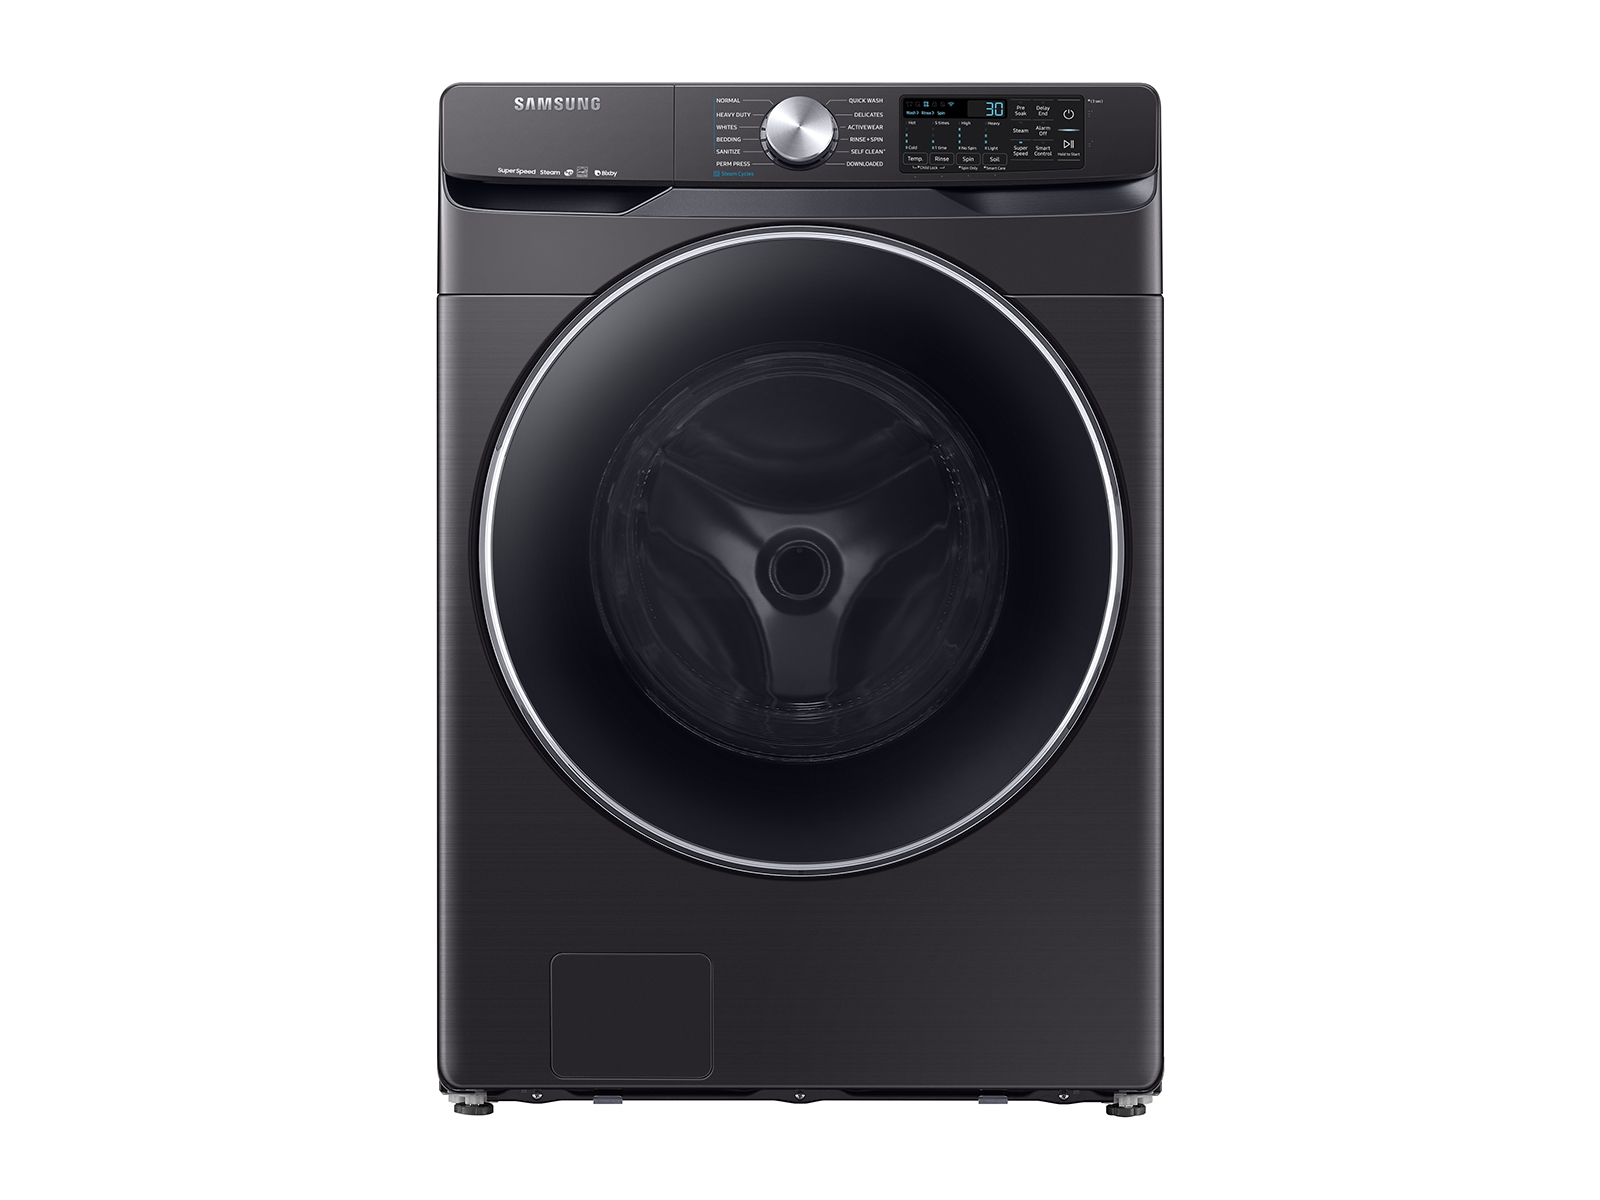 Samsung 4.5 cu. ft. Smart Front Load Washer with Super Speed in Black Stainless Steel(WF45R6300AV/US)